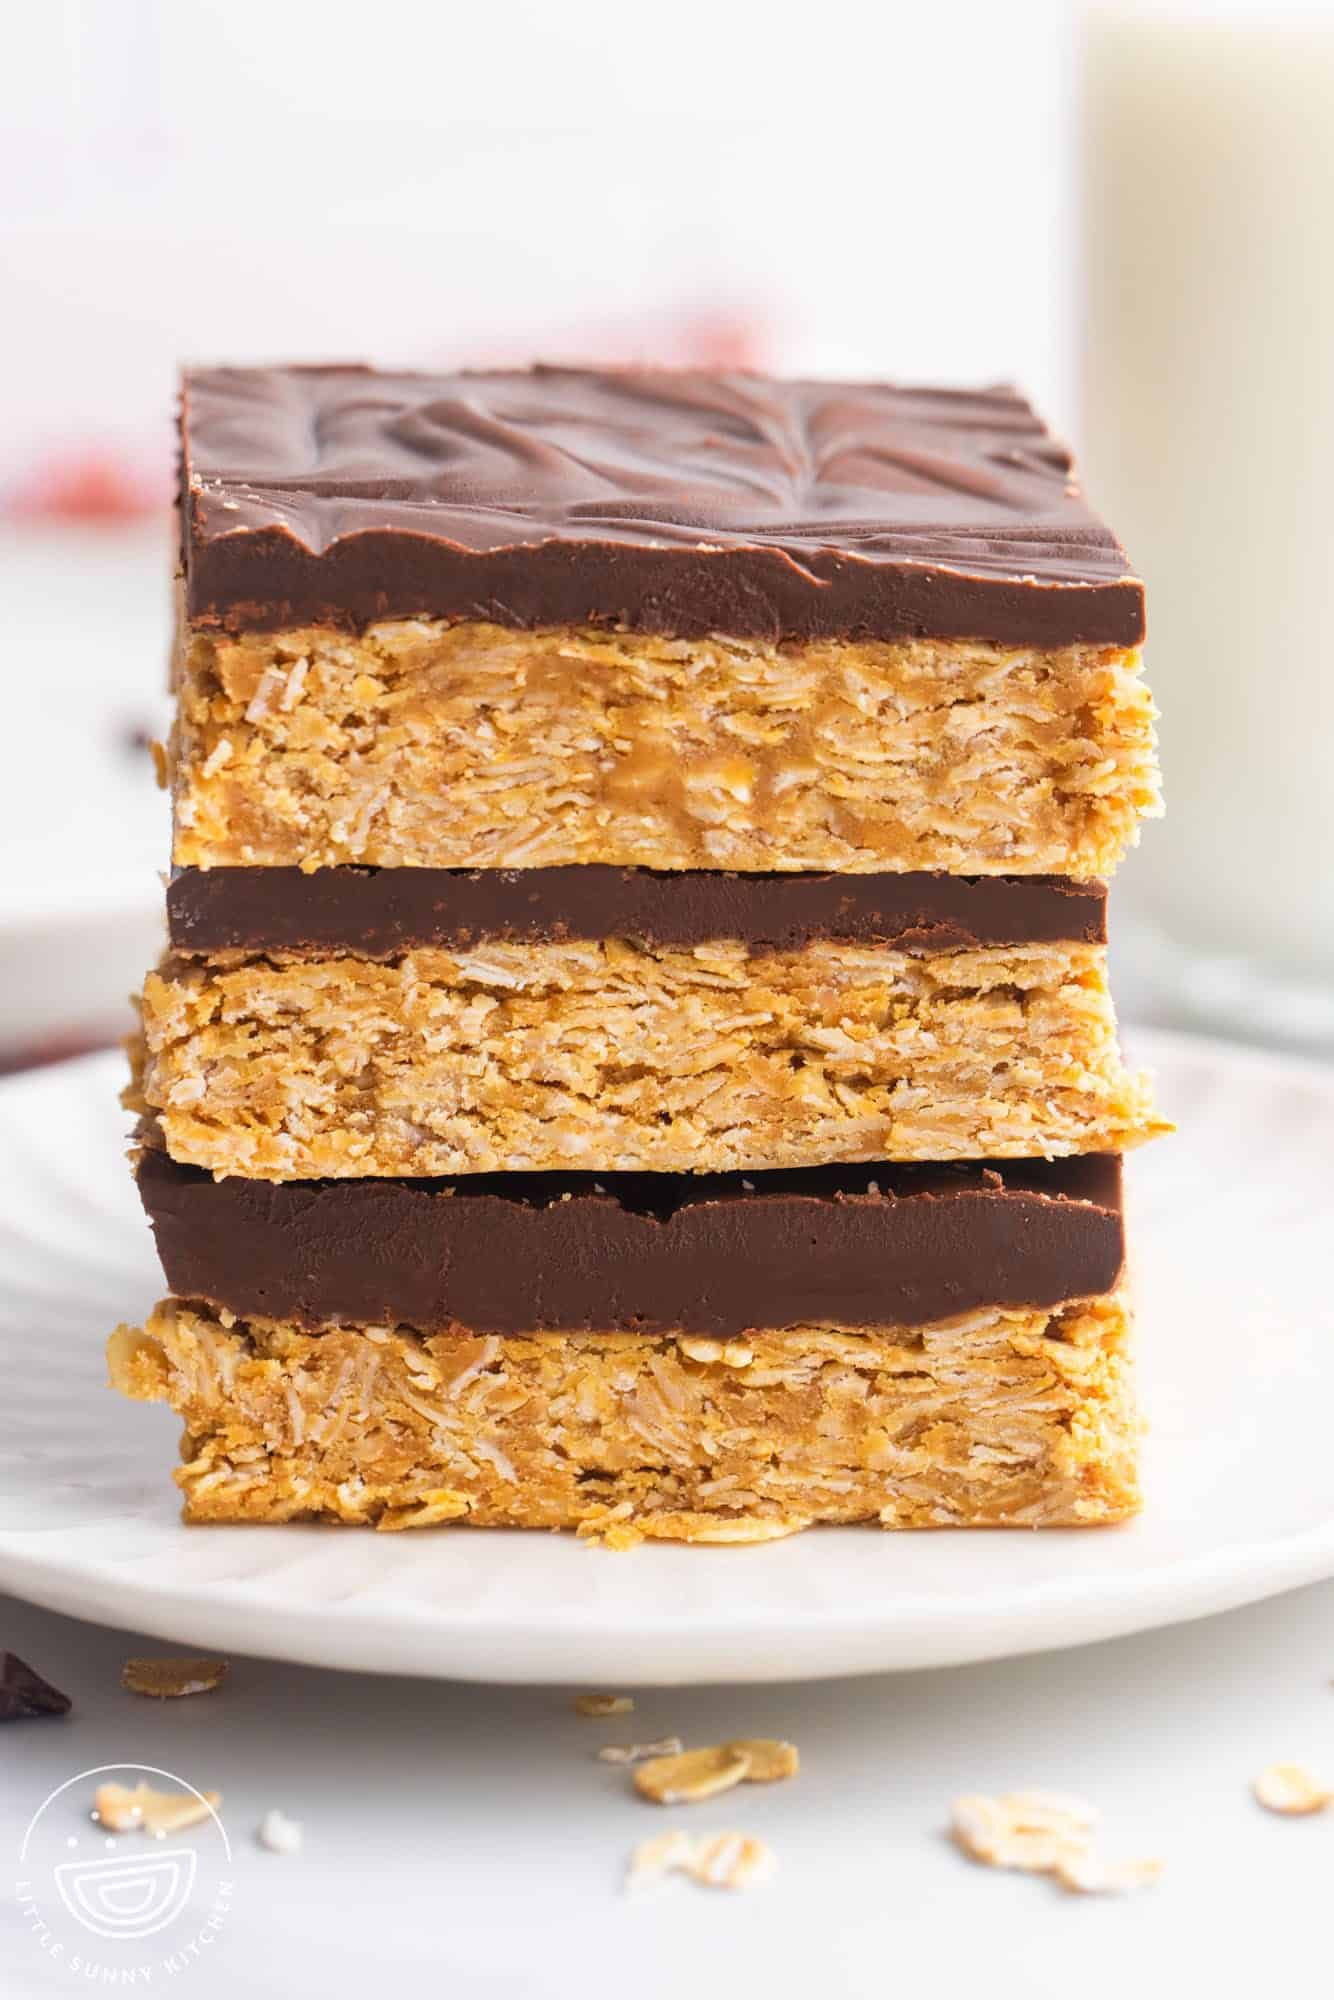 three chocolate peanut butter oatmeal bars stacked on a plate.